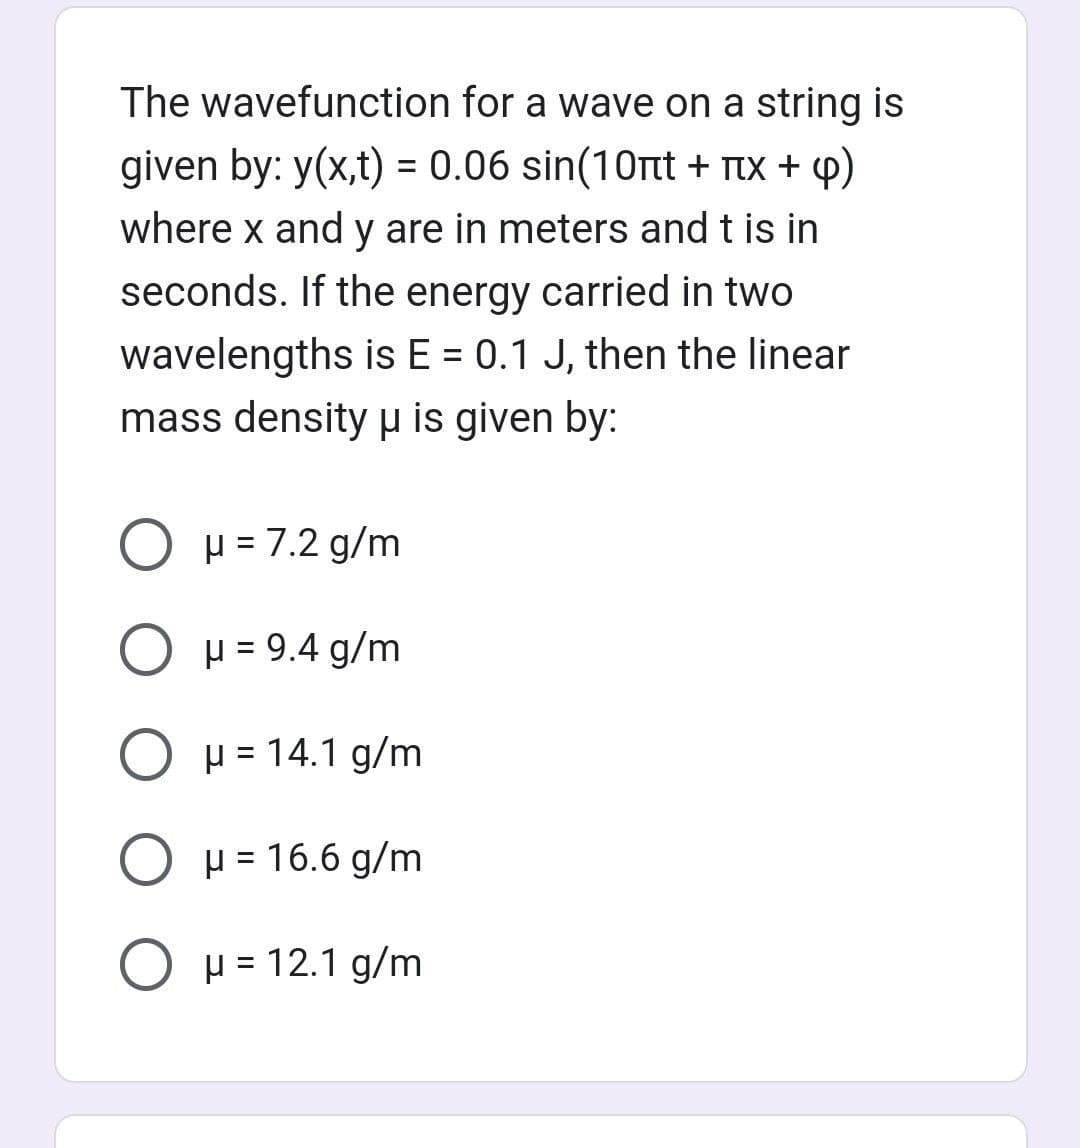 The wavefunction for a wave on a string is
given by: y(x,t) = 0.06 sin(10nt + x + p)
where x and y are in meters and t is in
seconds. If the energy carried in two
wavelengths is E = 0.1 J, then the linear
mass density μ is given by:
O μ = 7.2 g/m
O μ = 9.4 g/m
O μ = 14.1 g/m
O μ = 16.6 g/m
O μ = 12.1 g/m